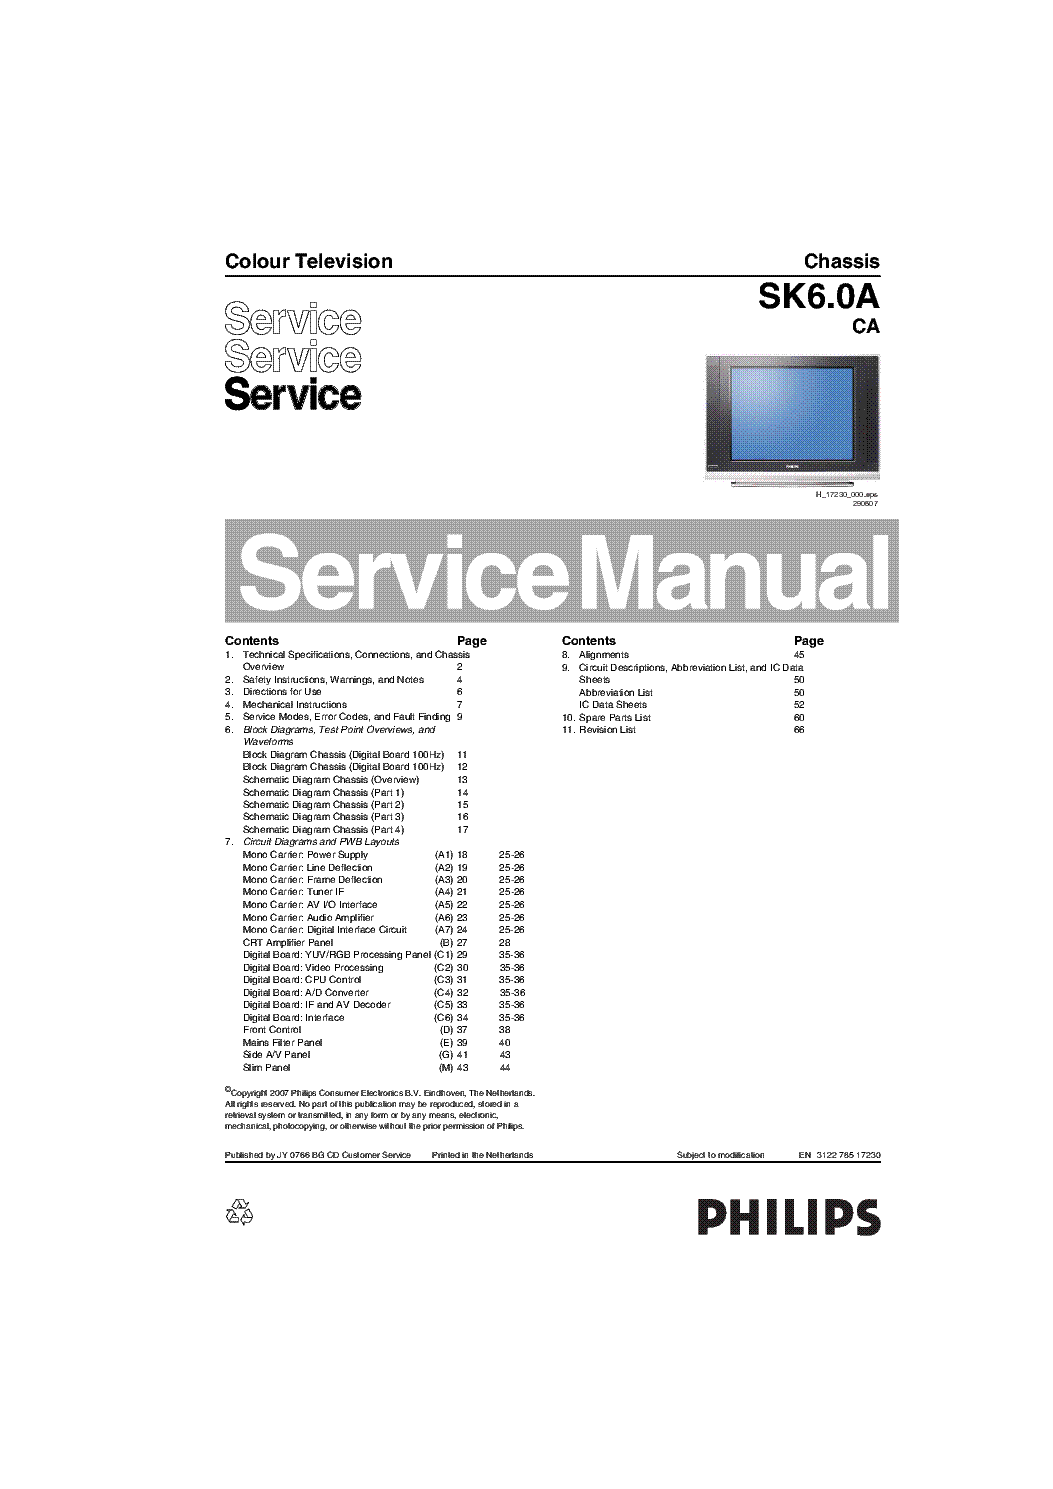 PHILIPS CHASSIS SK6.0A CA SM service manual (1st page)